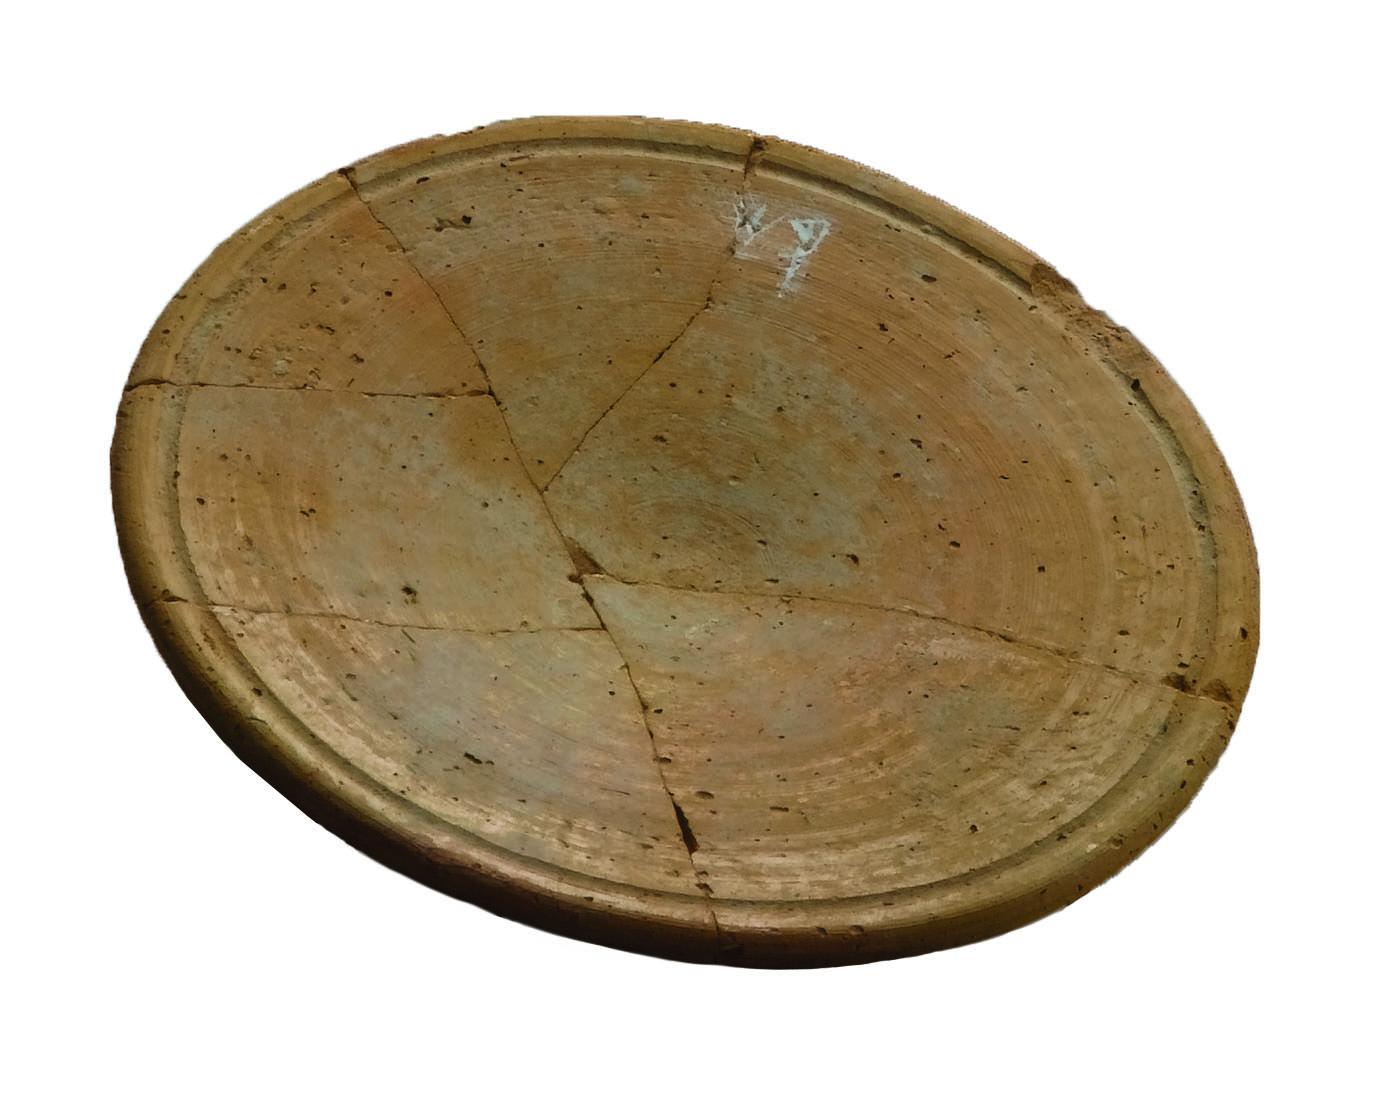 Shallow bowl with concentric circles and two-letter Hebrew inscription.